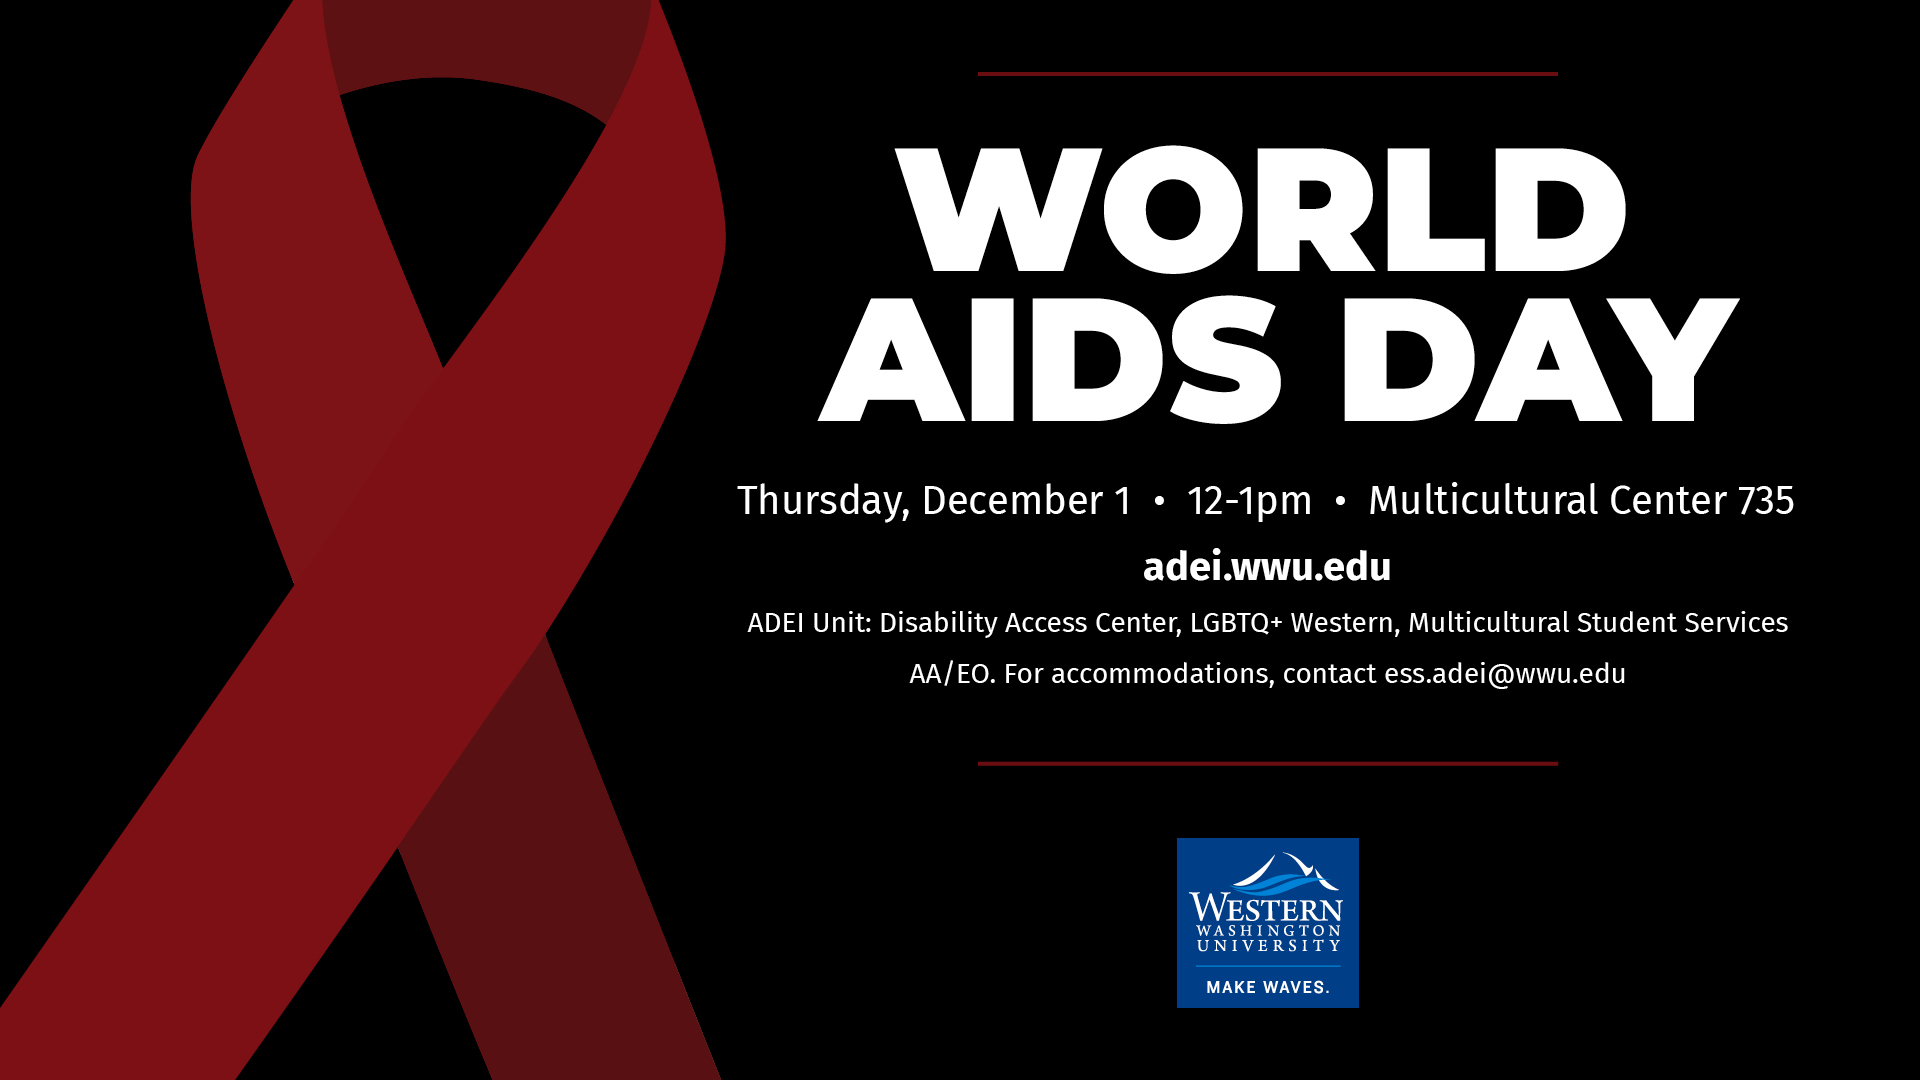 Decorative Flyer of an AIDS support ribbon for World AIDS Day, with text that provides event details listed on this page and the WWU logo.